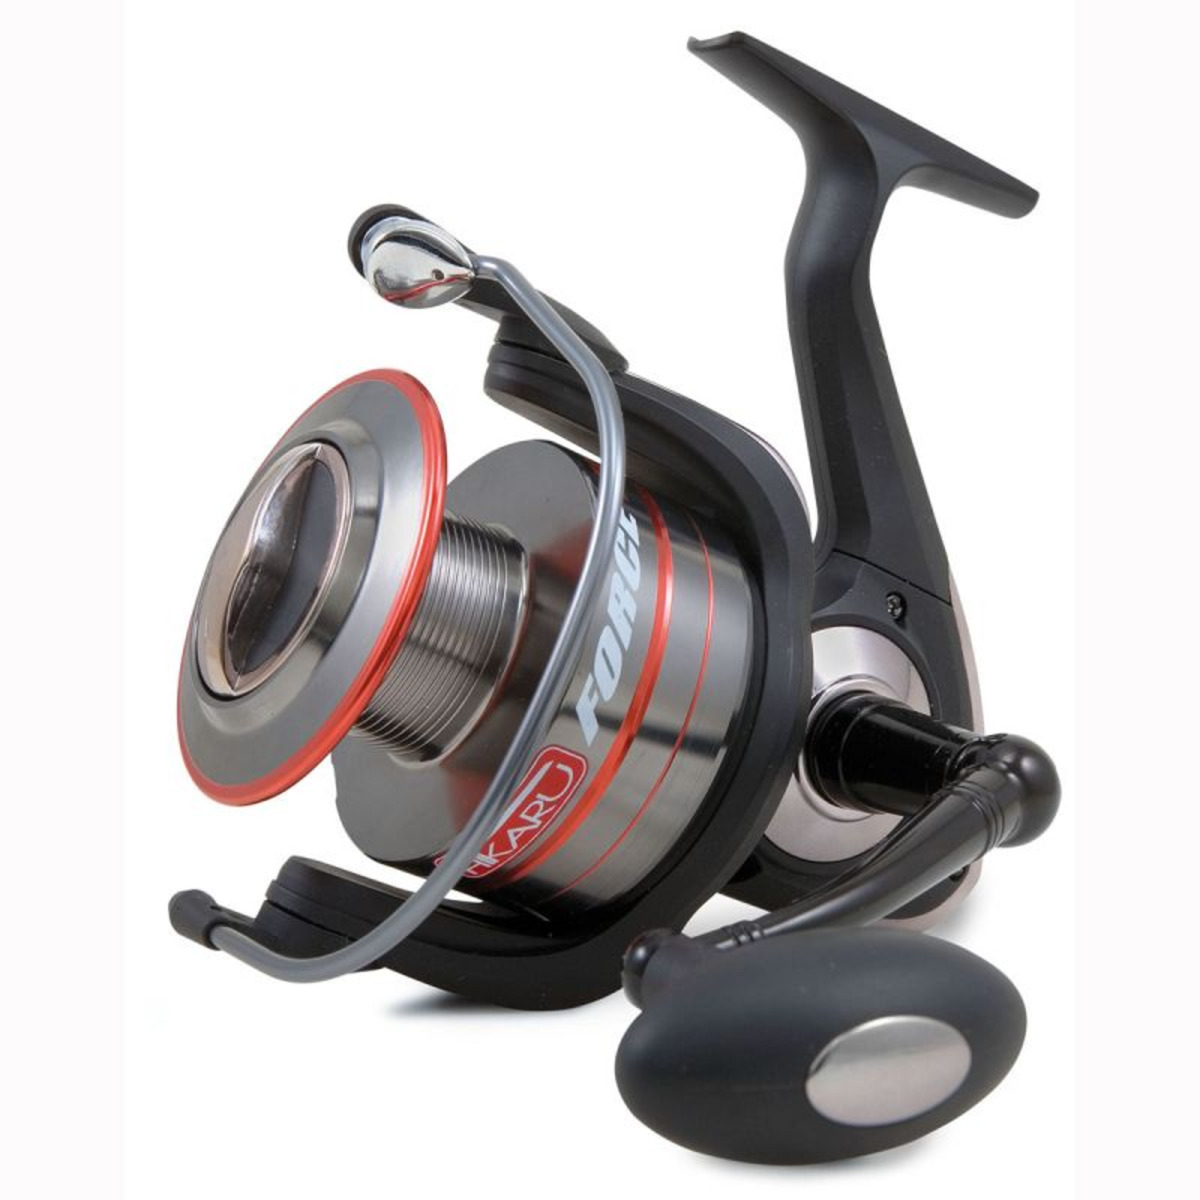 Lineaeffe Aquarex Spinnrolle 8 BB Spin Frontbremsrolle Raubfisch Spin reel 